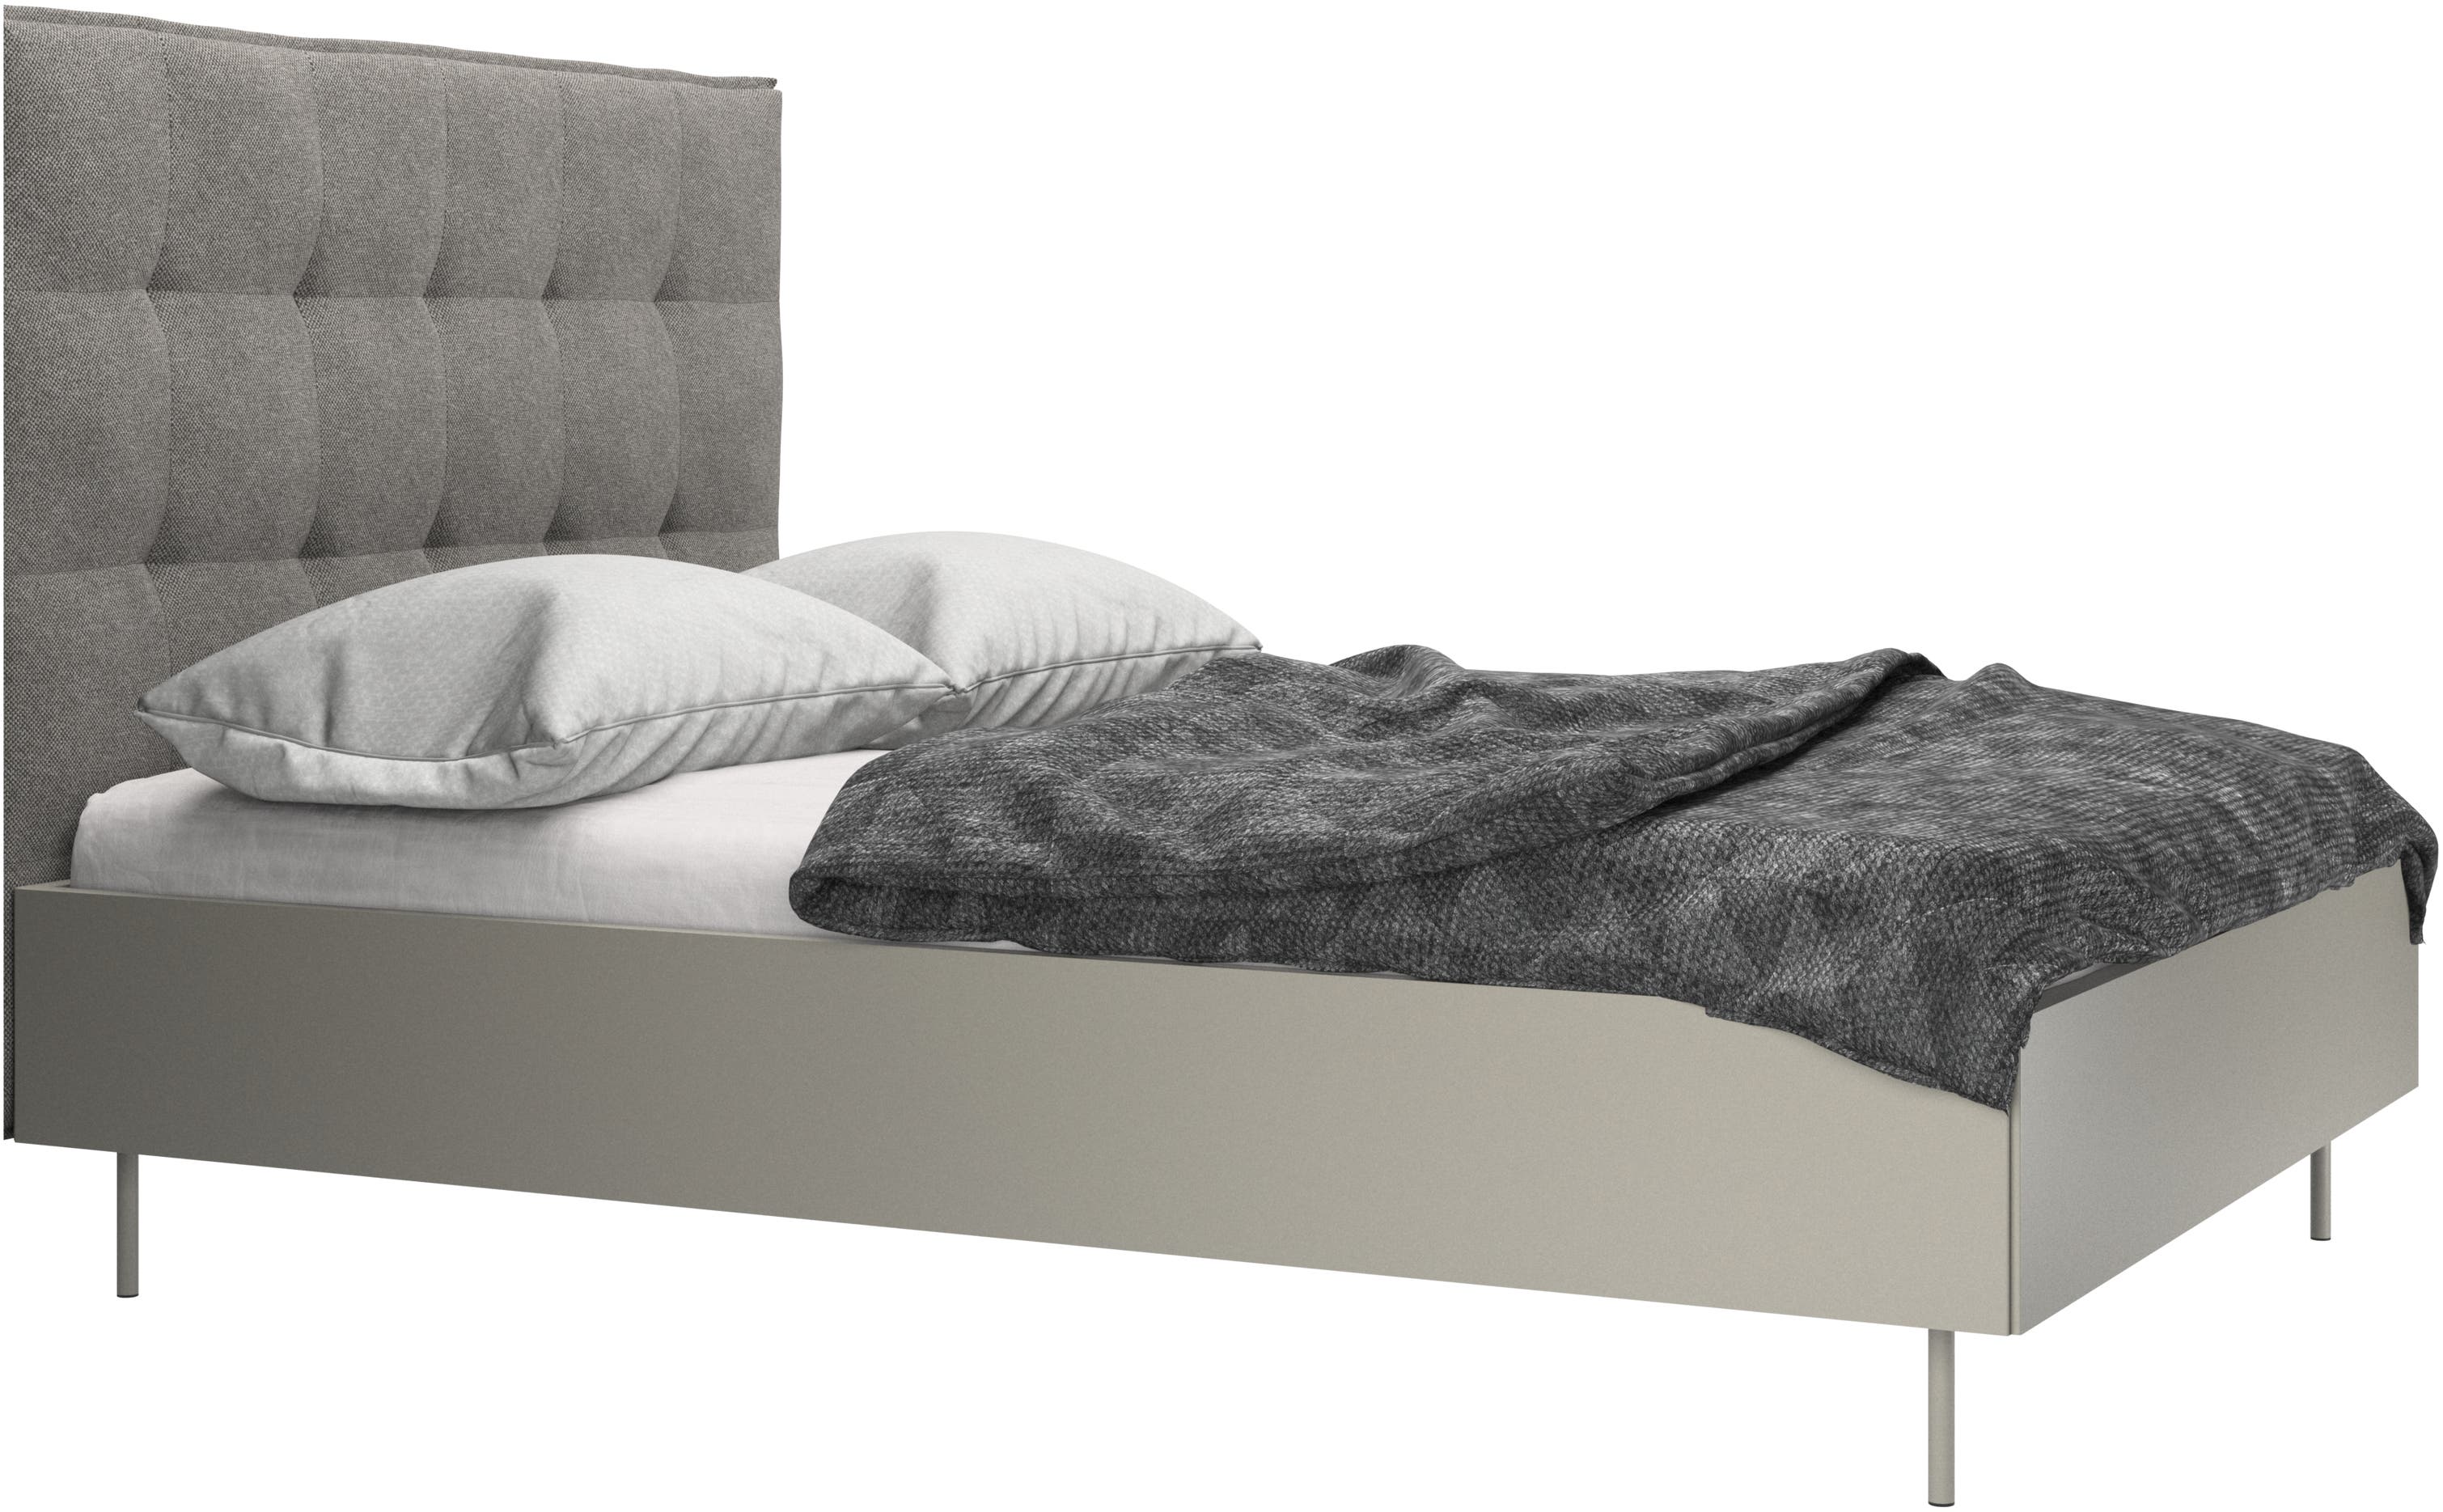 Lugano bed, excl. mattress